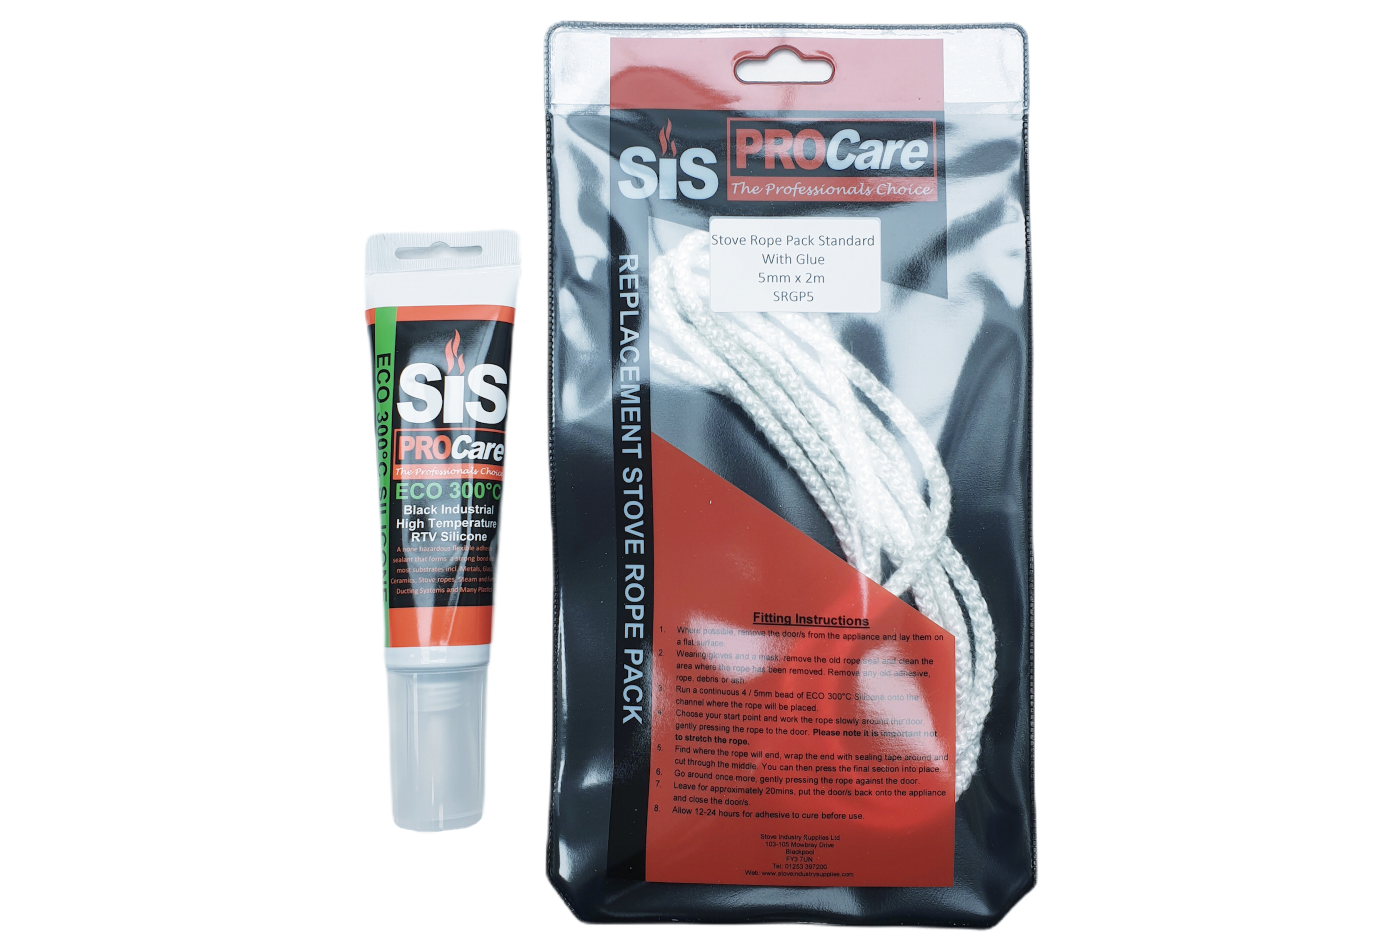 SiS Procare White 5 milimetre x 2 metre Standard Stove Rope & 80 millilitre Rope Glue Pack - product code SRGP5